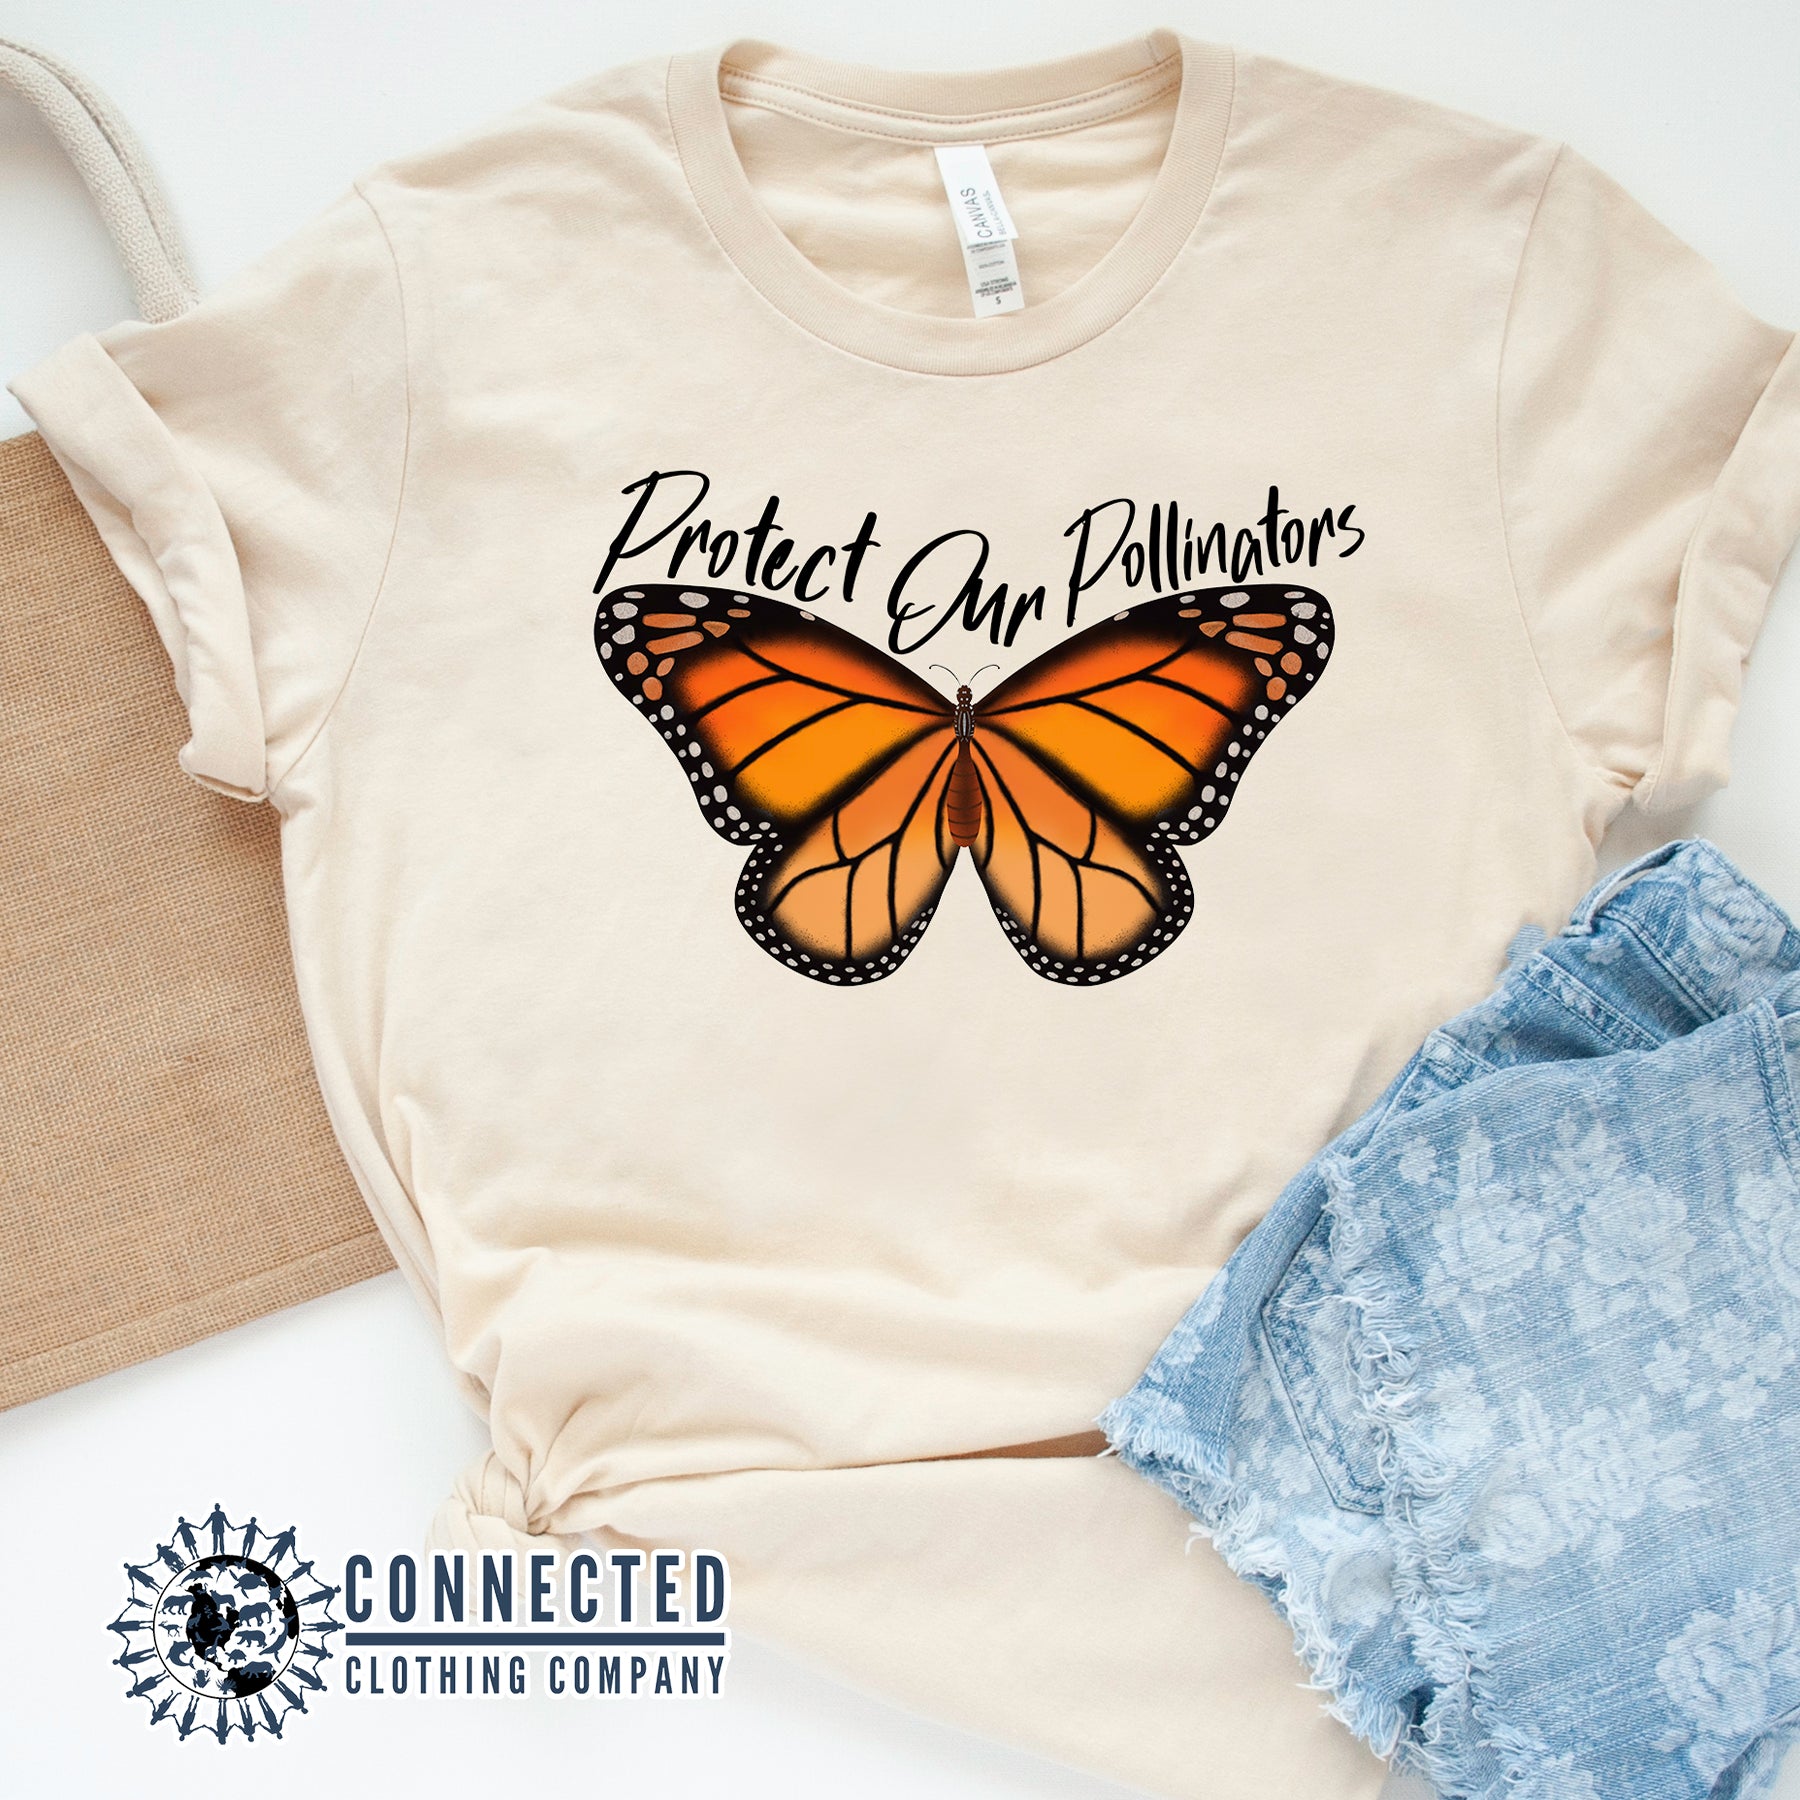 Soft Cream Protect Our Pollinators Short-Sleeve Tee - Connected Clothing Company - Ethically and Sustainably Made - 10% of profits donated to pollinator and monarch conservation and ocean conservation